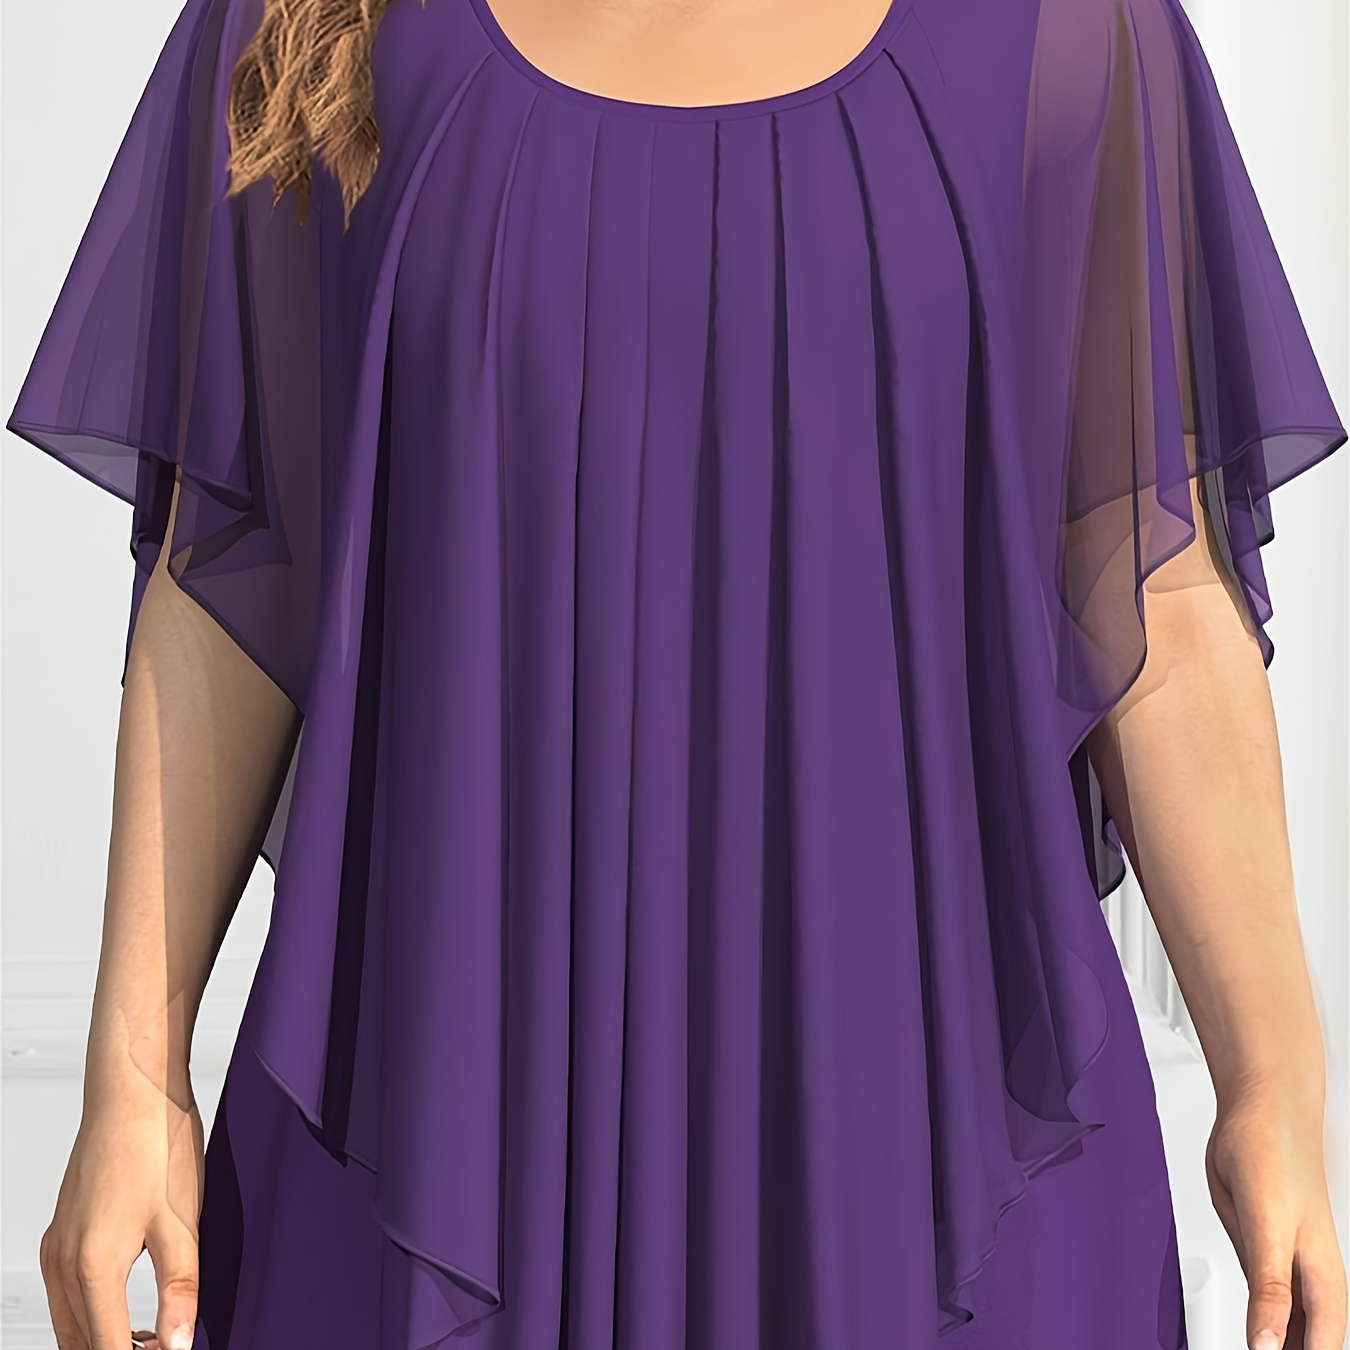 

Plus Size Elegant Top, Women's Plus Solid Layered Mesh Butterfly Sleeve Round Neck Shirt Top